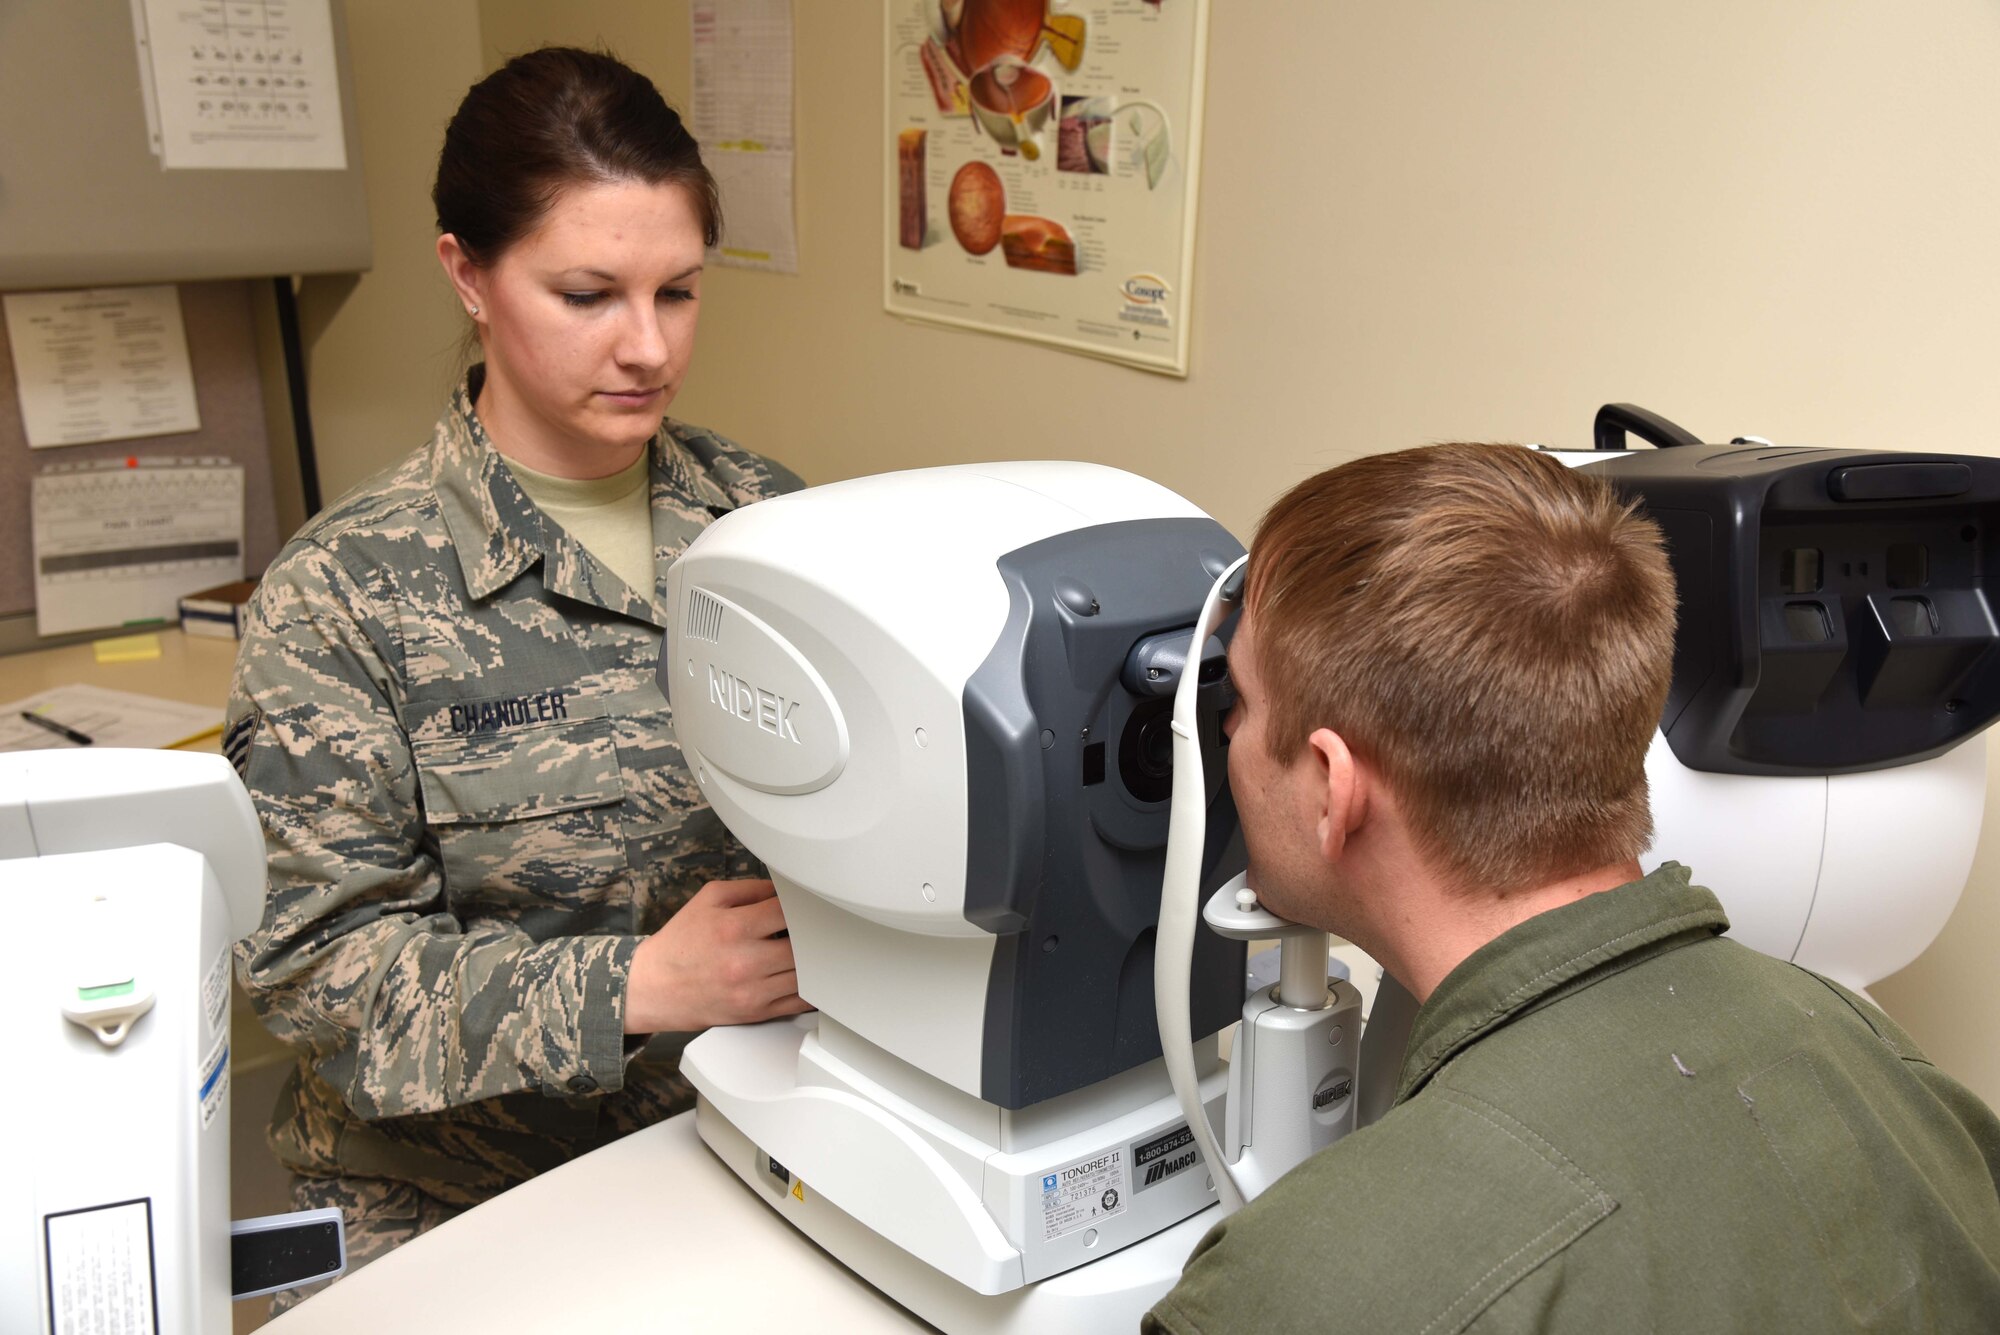 Staff Sgt. Kristen Chandler, 403rd Aeromedical Staging Squadron noncommissioned officer in charge, uses a non-contact tonometer during an optometry exam to check the eye pressure of Master Sgt. Joseph Helm, 815th Airlift Squadron training noncommissioned officer in charge Feb. 10 at Keesler Air Force Base, Mississippi. One of the roles of ASTS is to make sure that the wing’s Citizen Airmen are healthy and fit for service worldwide. (U.S. Air Force photo/Tech. Sgt. Ryan Labadens)